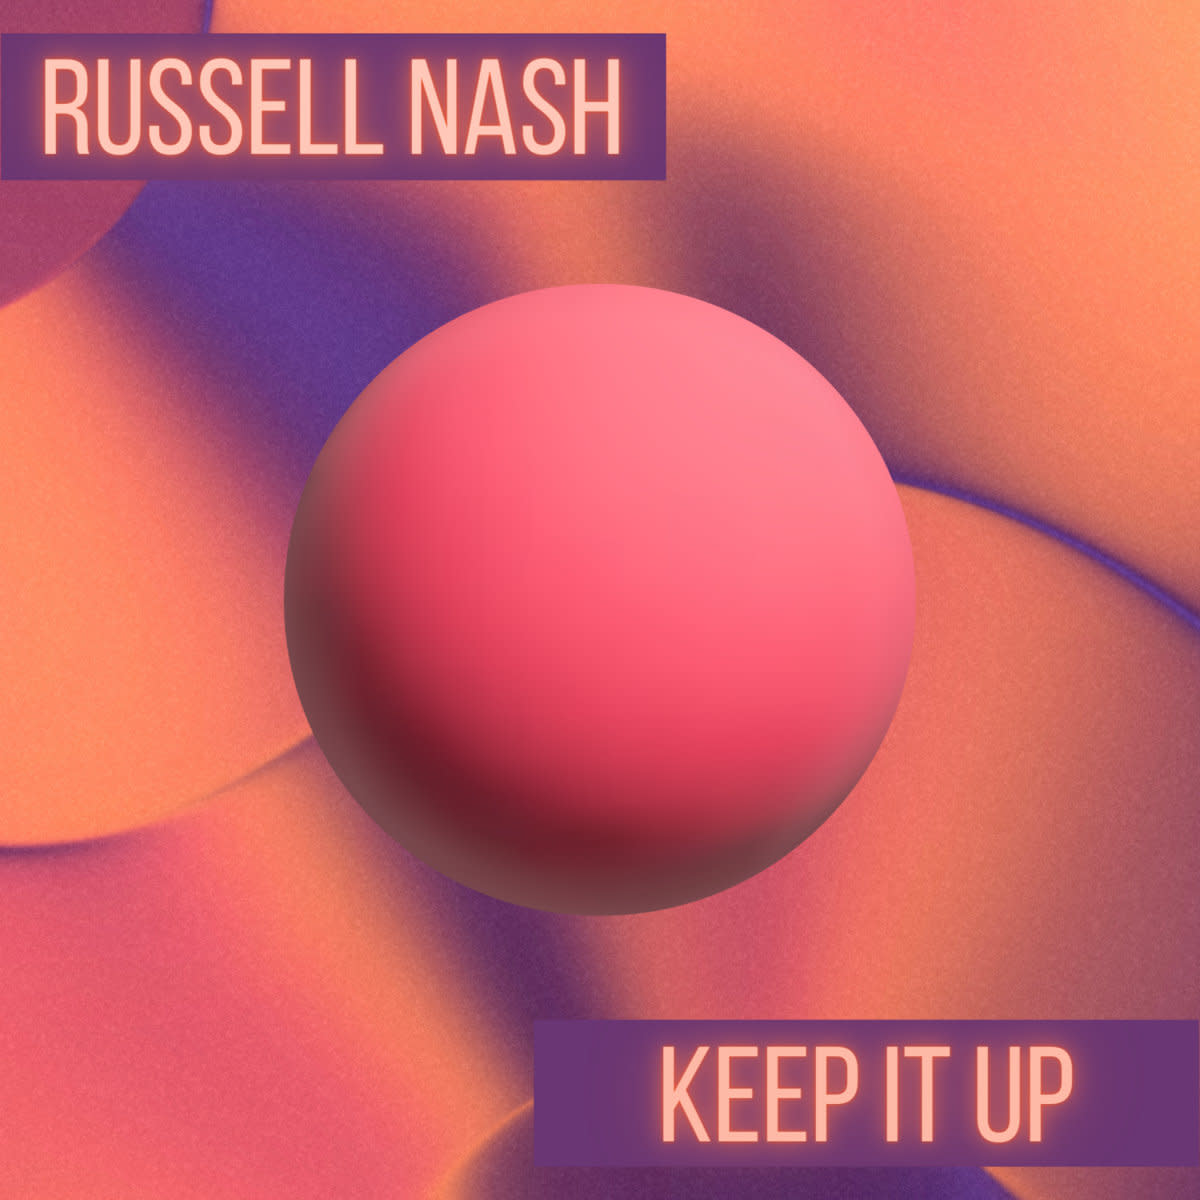 Synth Single Review: “Keep It Up” by Russell Nash